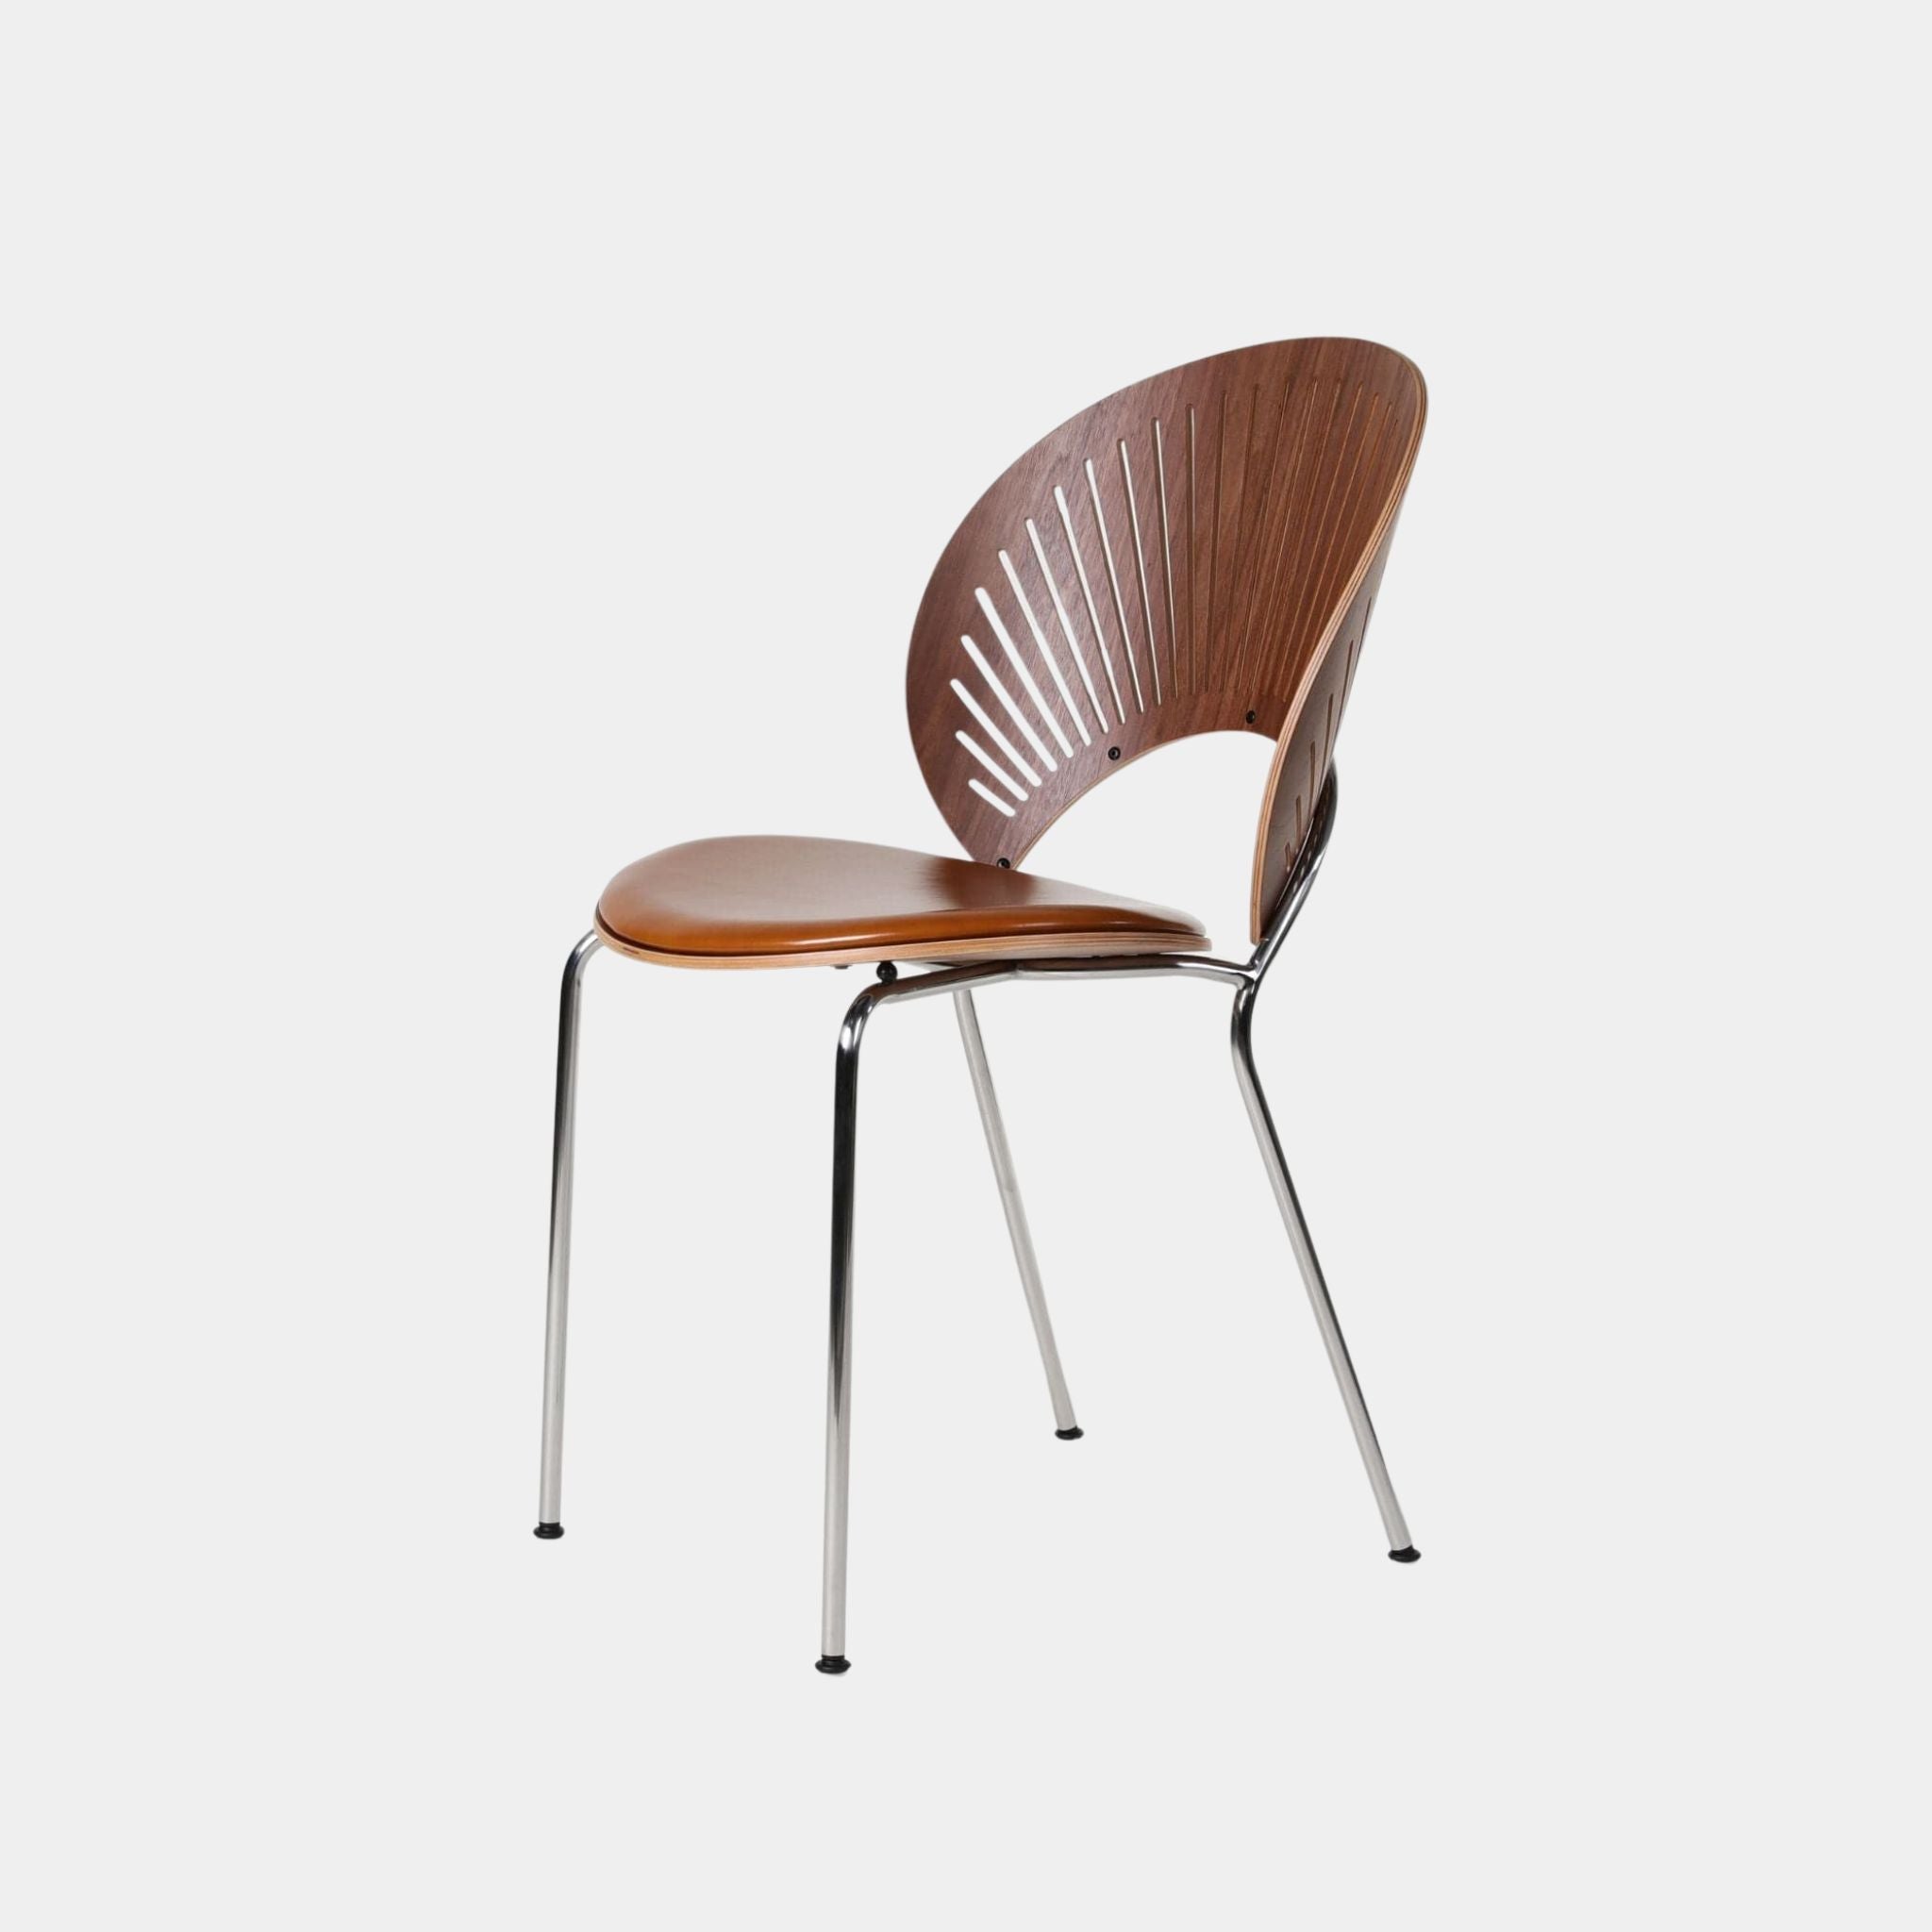 Fan Dining Chair - The Feelter